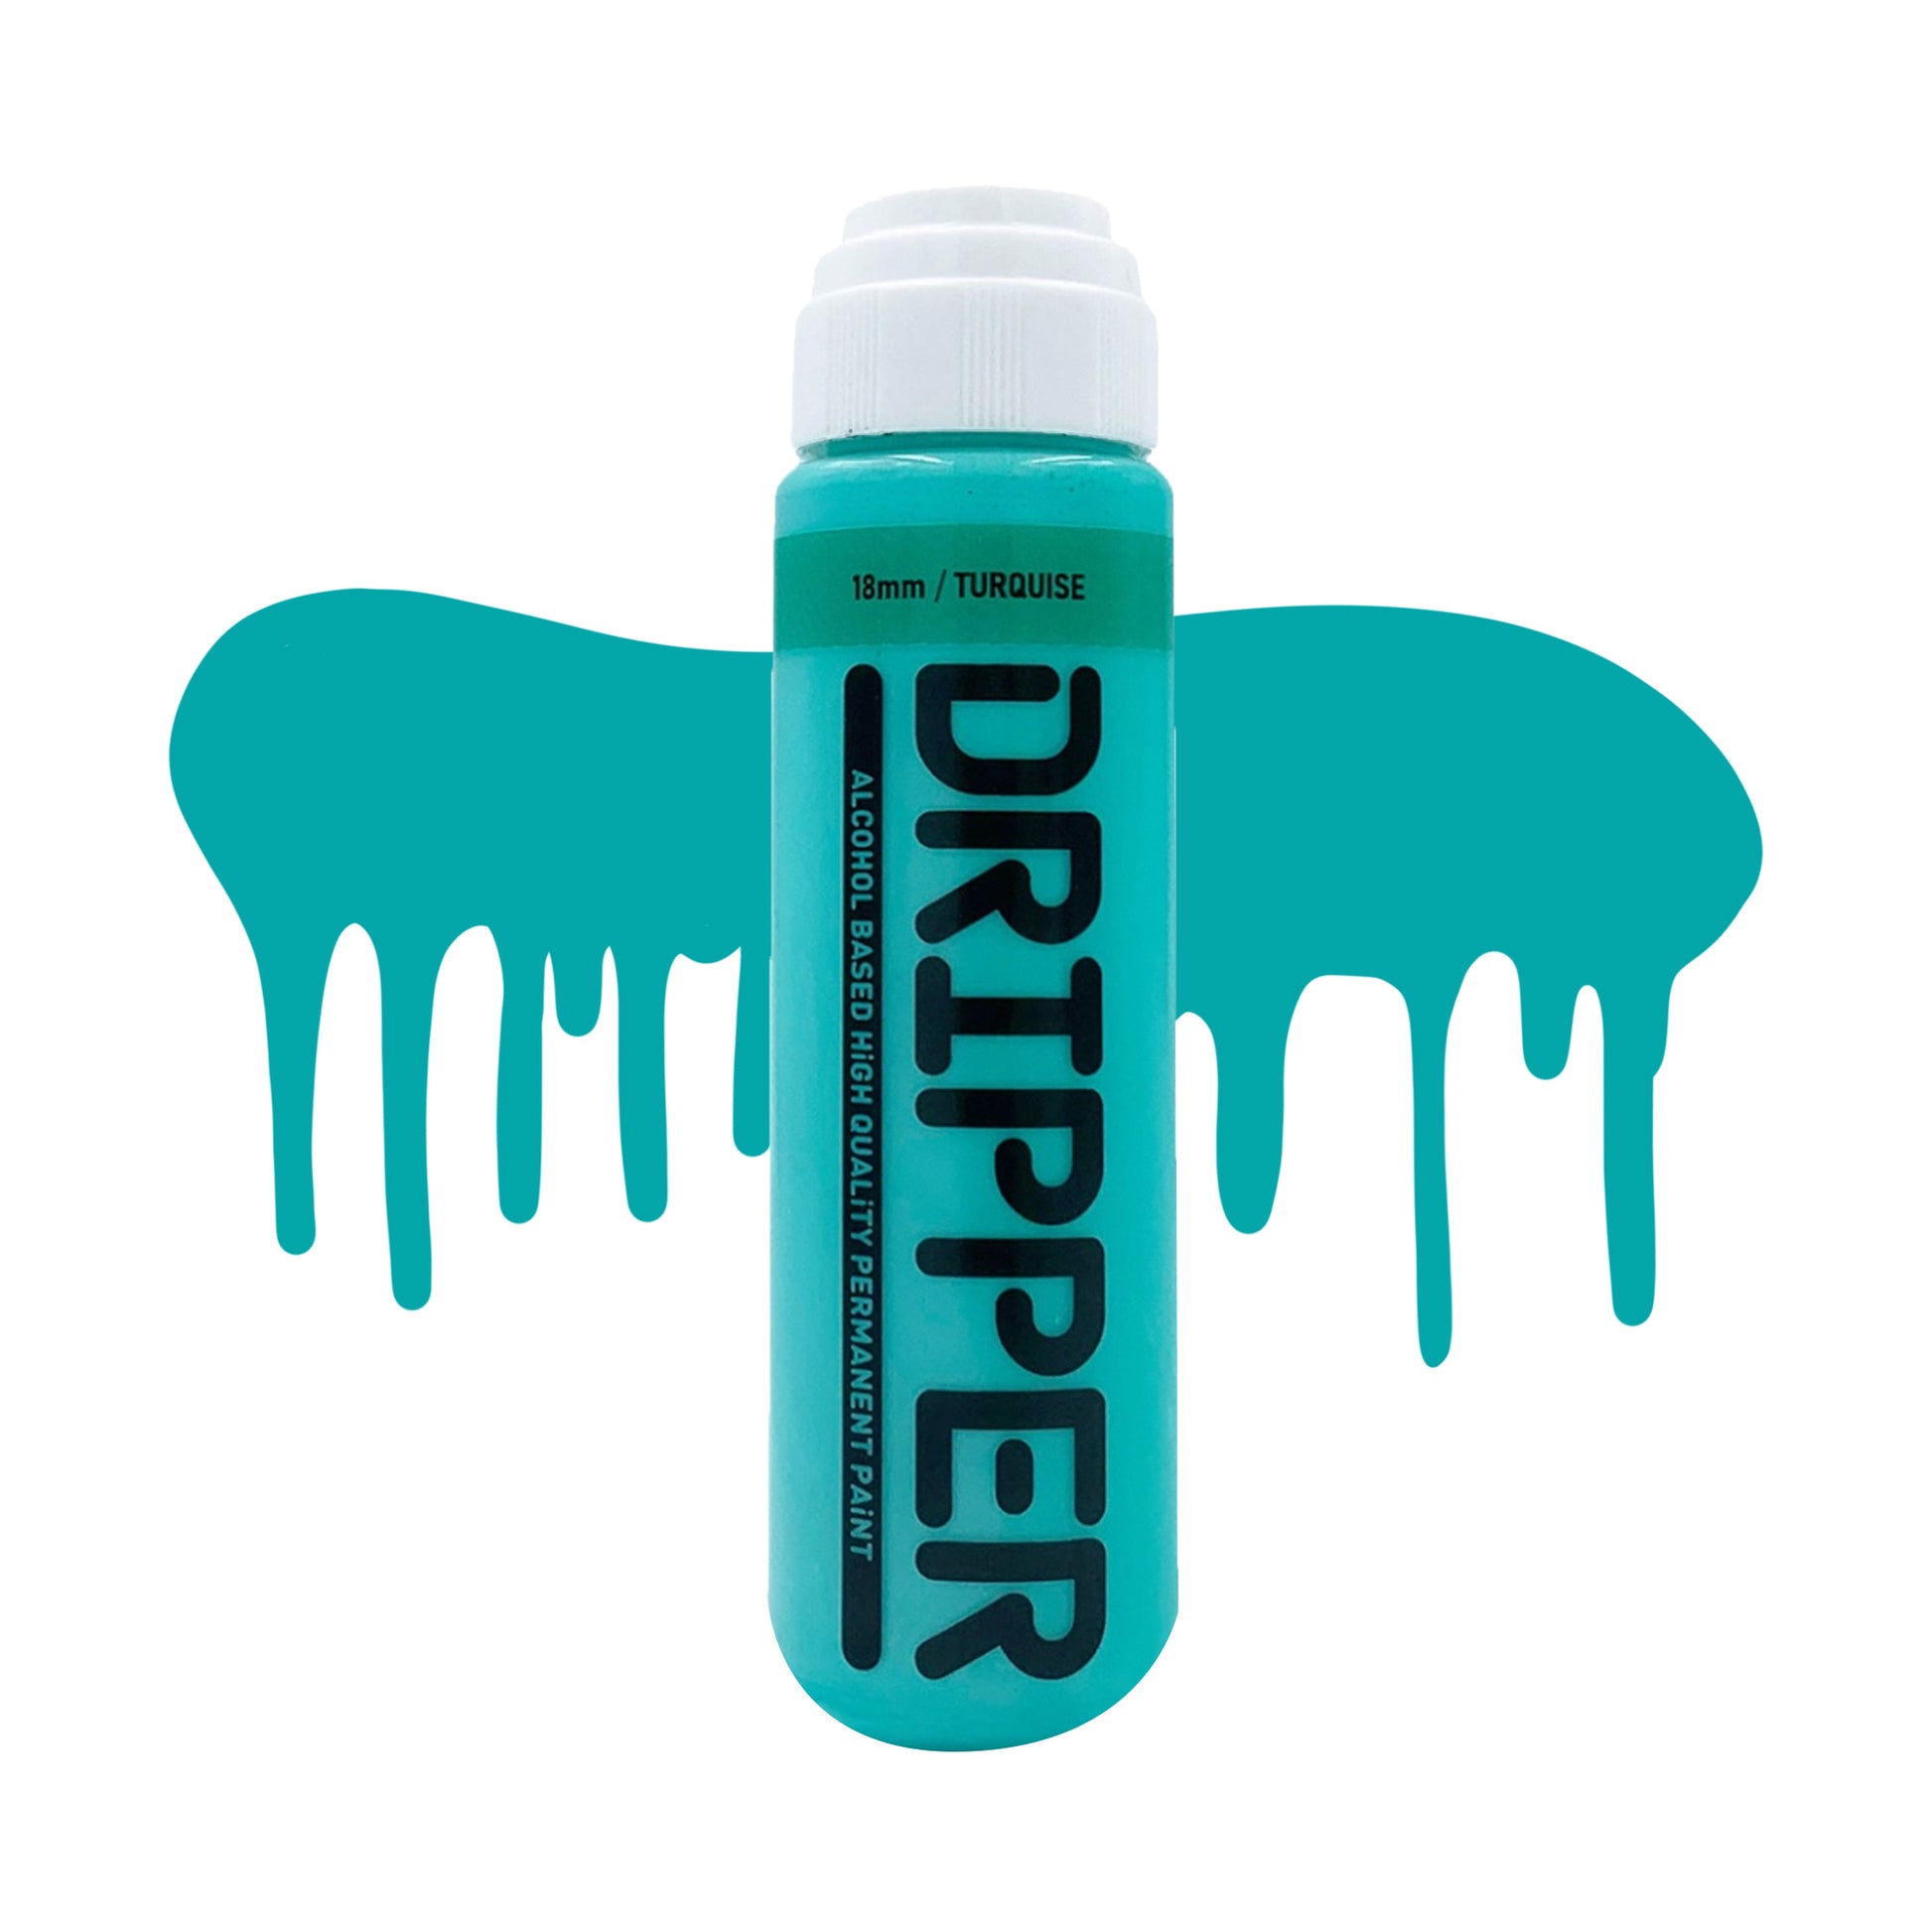 Dope Paint, Graffiti Squeeze Dripper Mop Marker in turquoise.